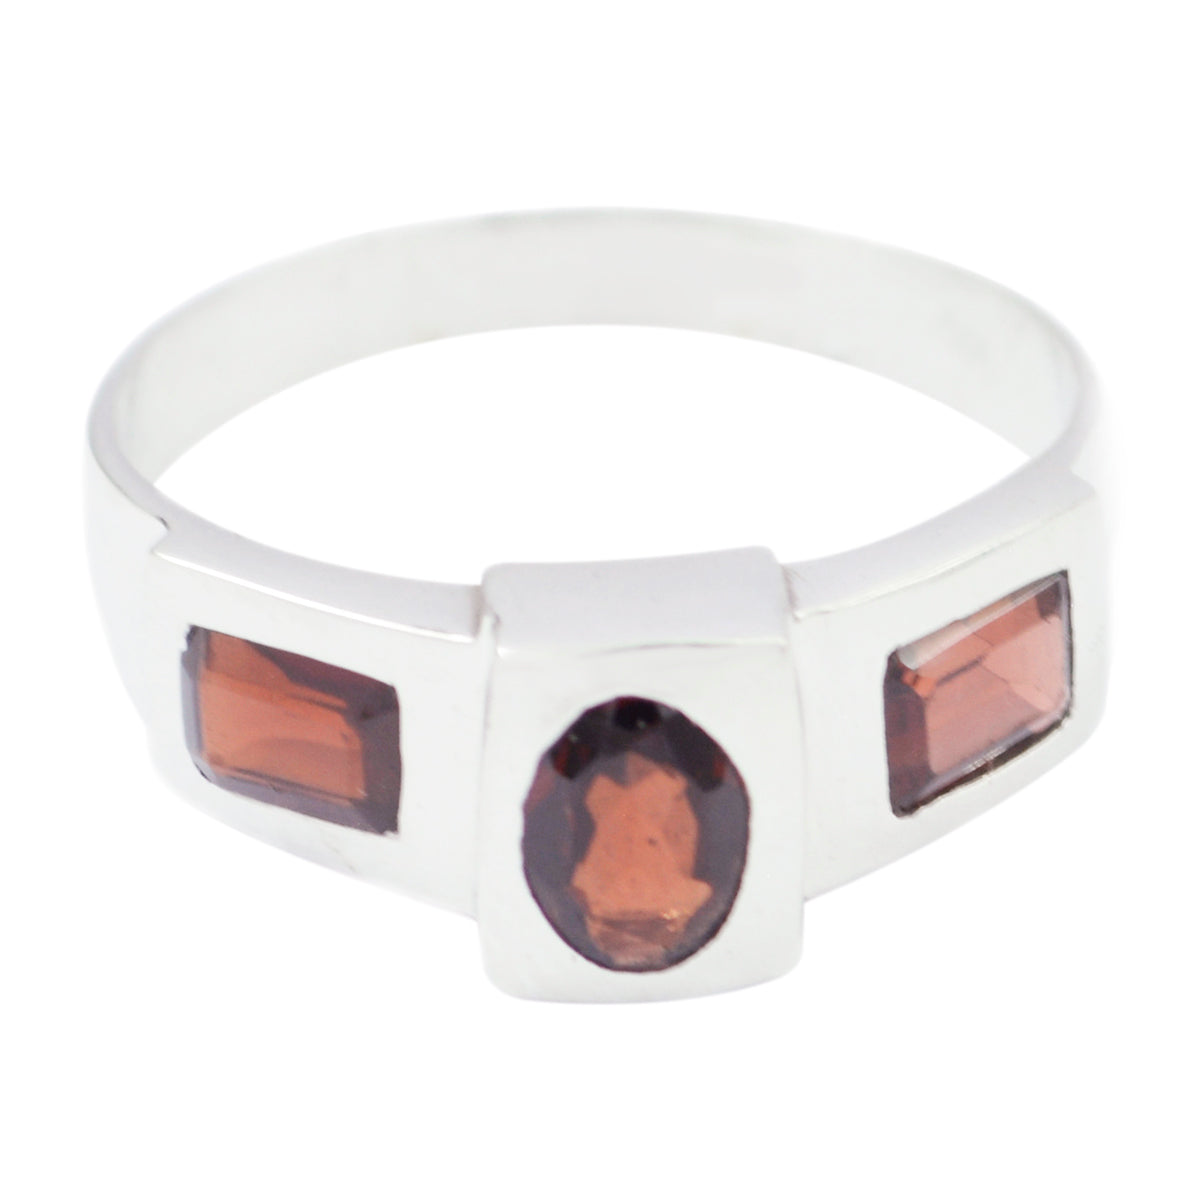 Exquisite Gem Garnet 925 Sterling Silver Ring Contemporary Jewelry